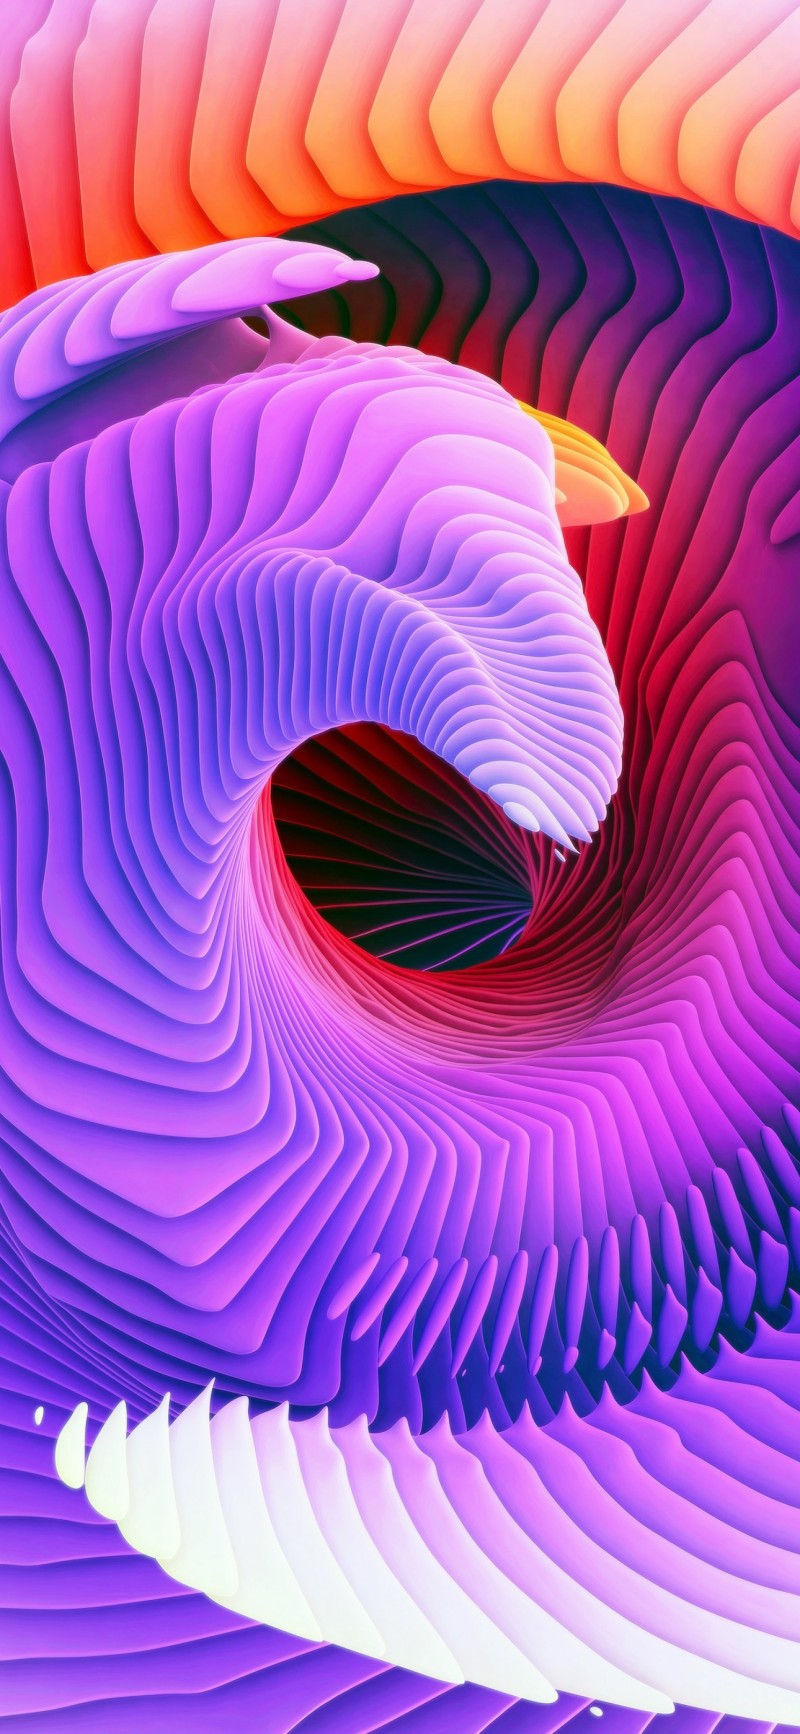 Abstract, Colorful, Portrait Display, 3D Abstract Wallpaper